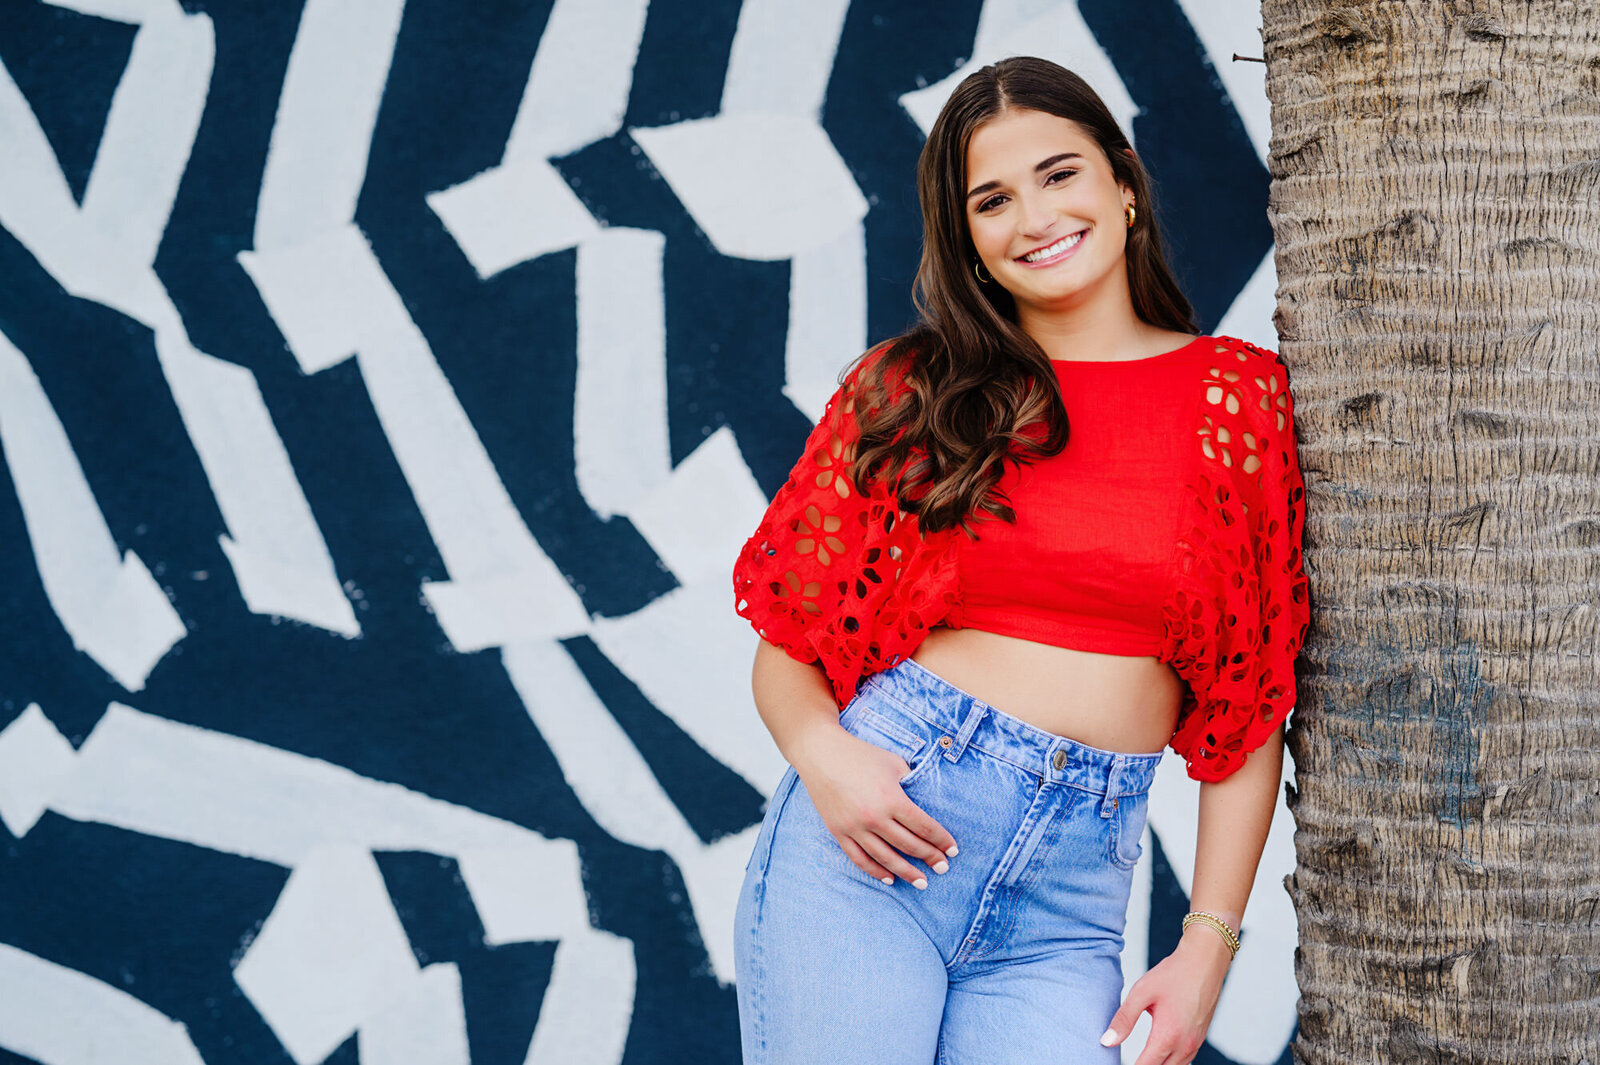 Jacksonville senior portrait at atalntic beach in a red shirt with urban wall